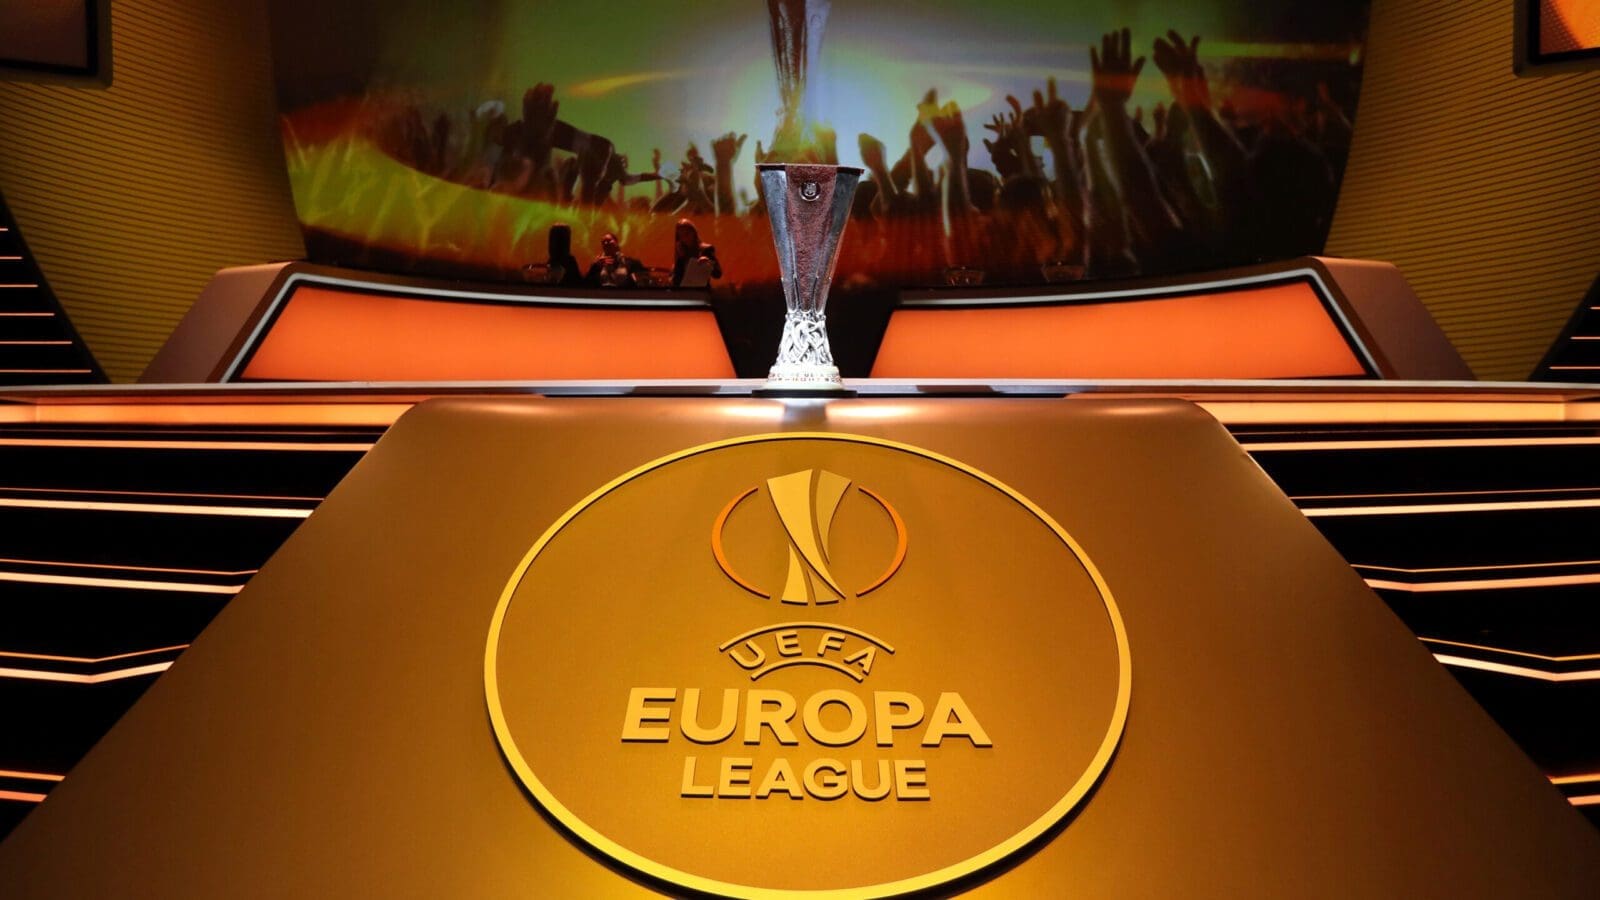 Europa league trophy scaled